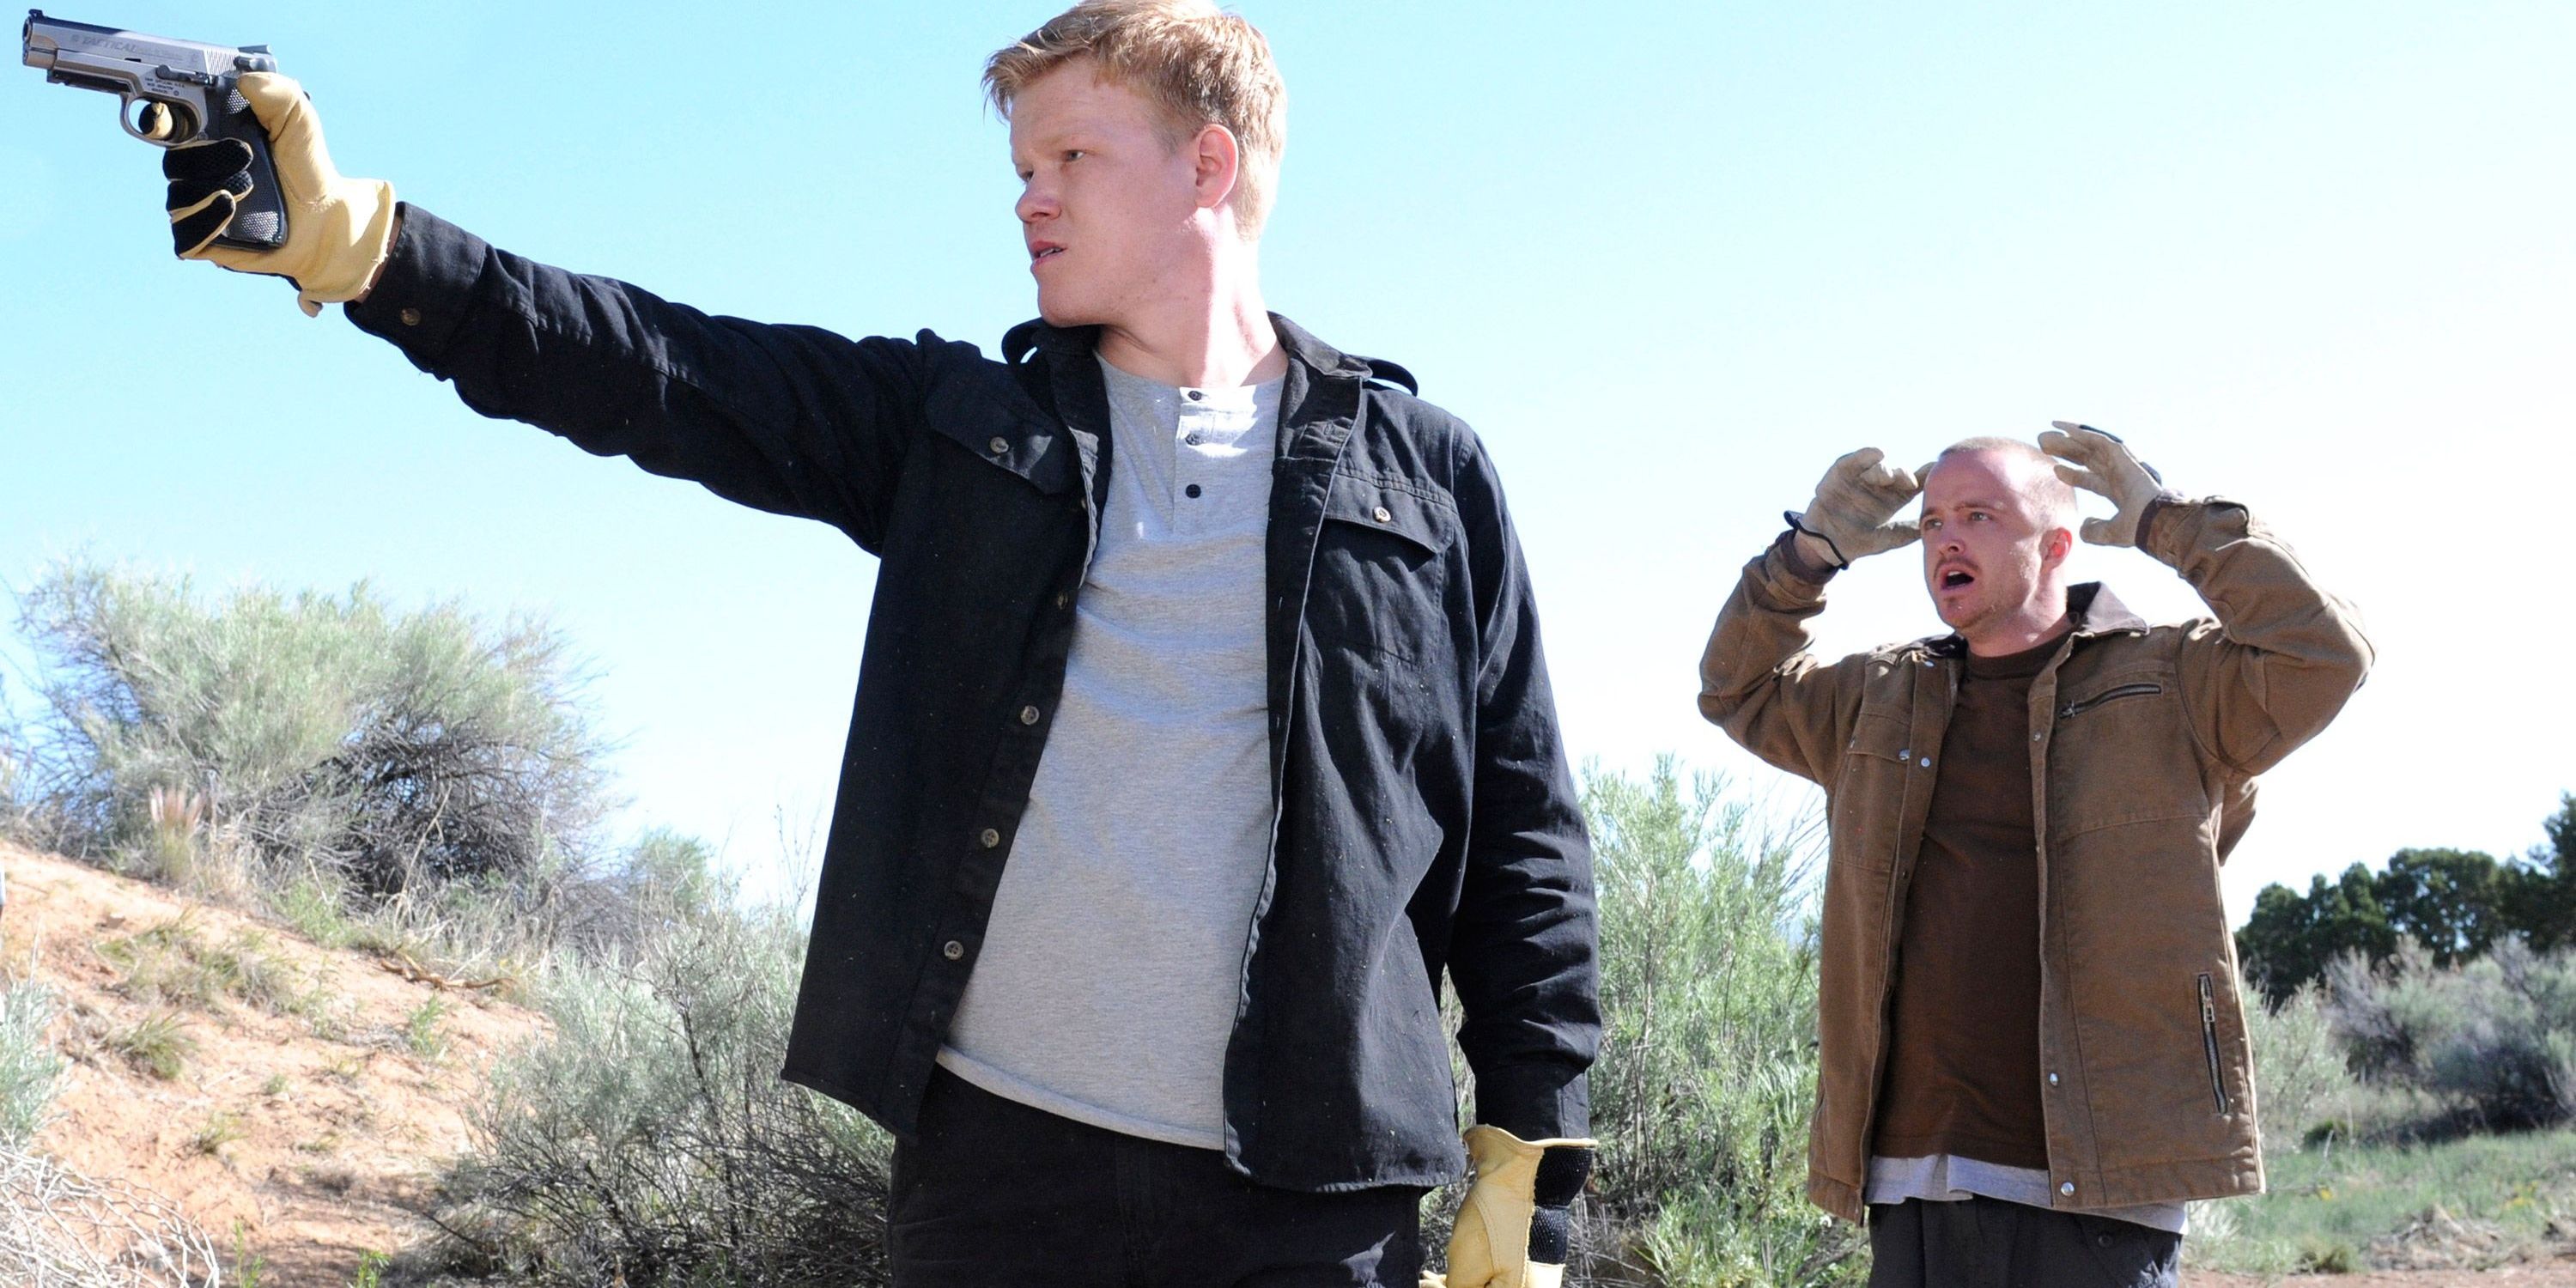 Jesse Plemons as Todd aiming a gun outside and Aaron Paul as Jesse Pinkman in Breaking Bad